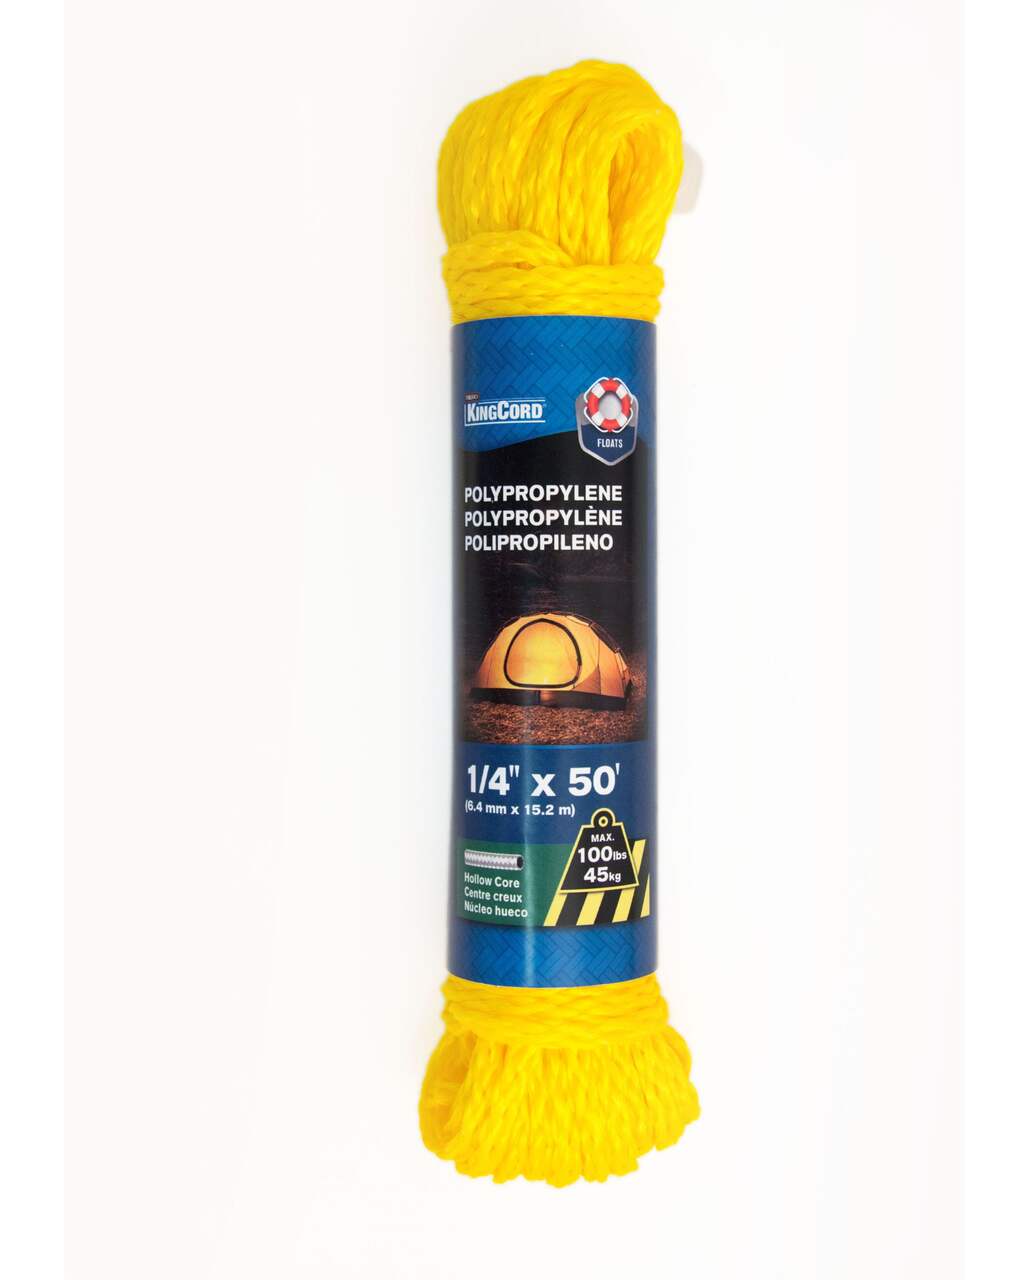 https://media-www.canadiantire.ca/product/fixing/hardware/general-hardware/0618527/rope-hollow-braid-1-4-x-50--ea357750-18c8-4baa-ae48-1816b705068e-jpgrendition.jpg?imdensity=1&imwidth=640&impolicy=mZoom